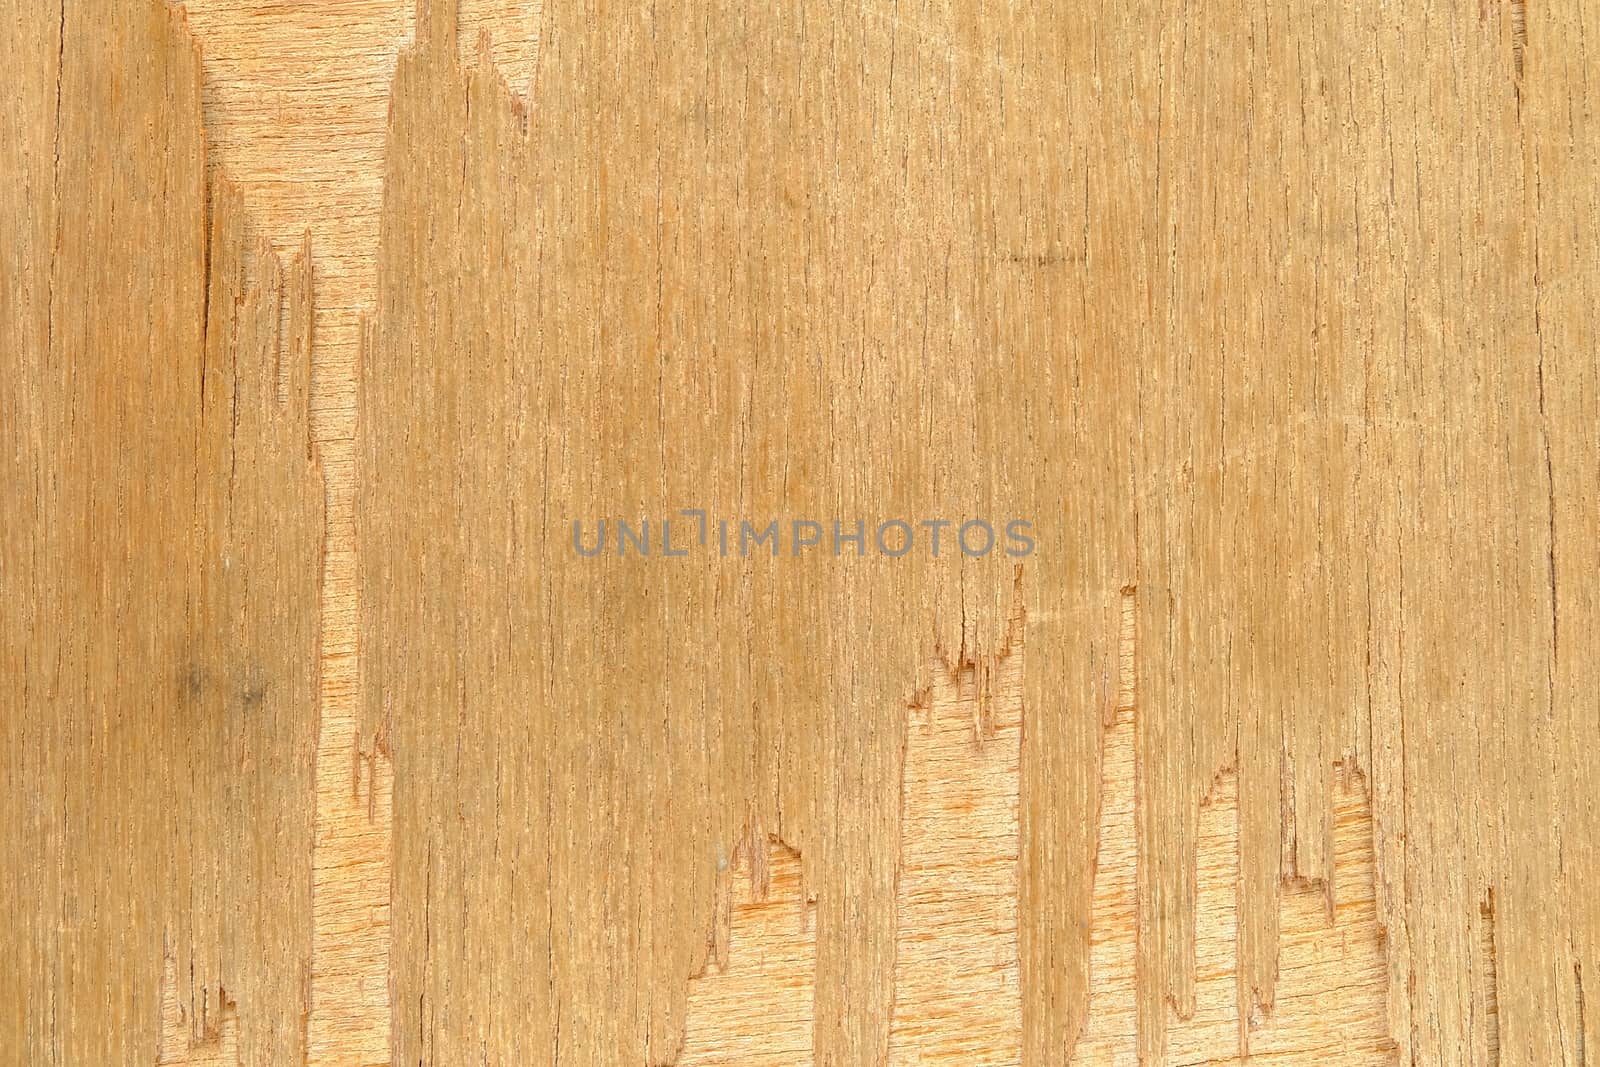 Weathered Wood Texture Background.